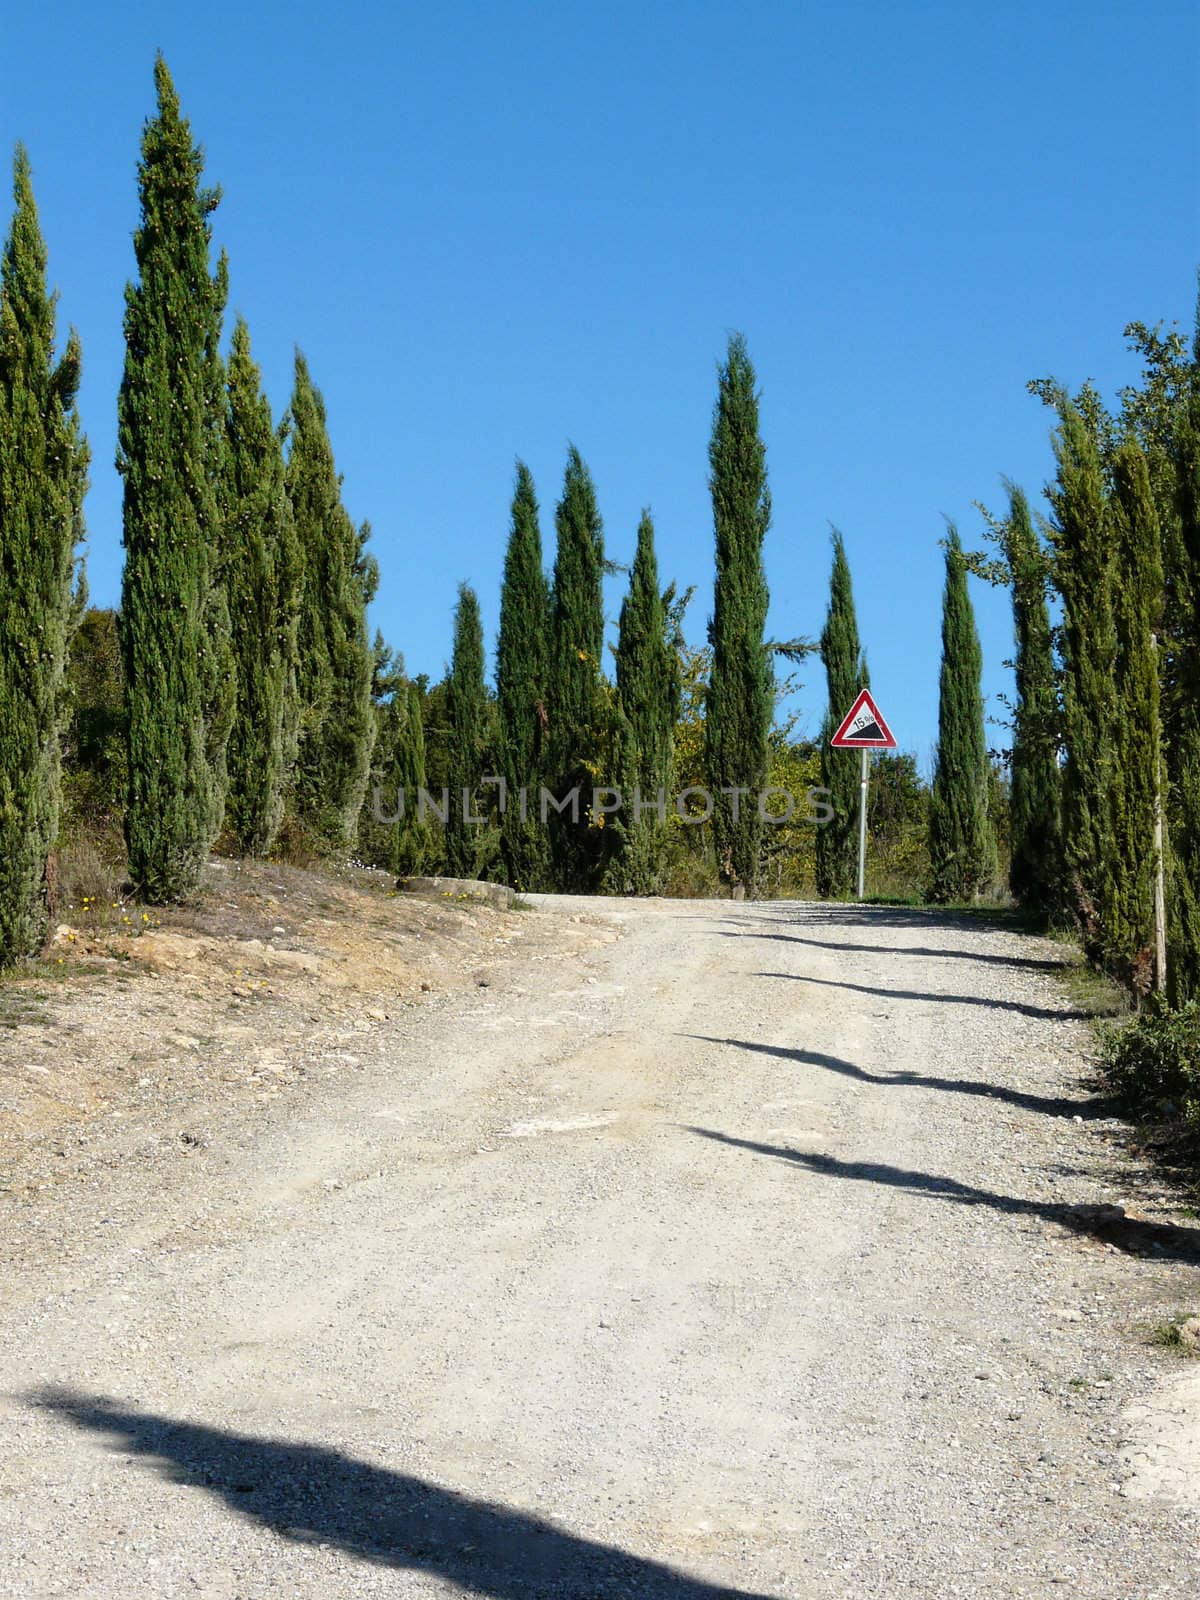 Dirt road in Italy lined with cypress trees.